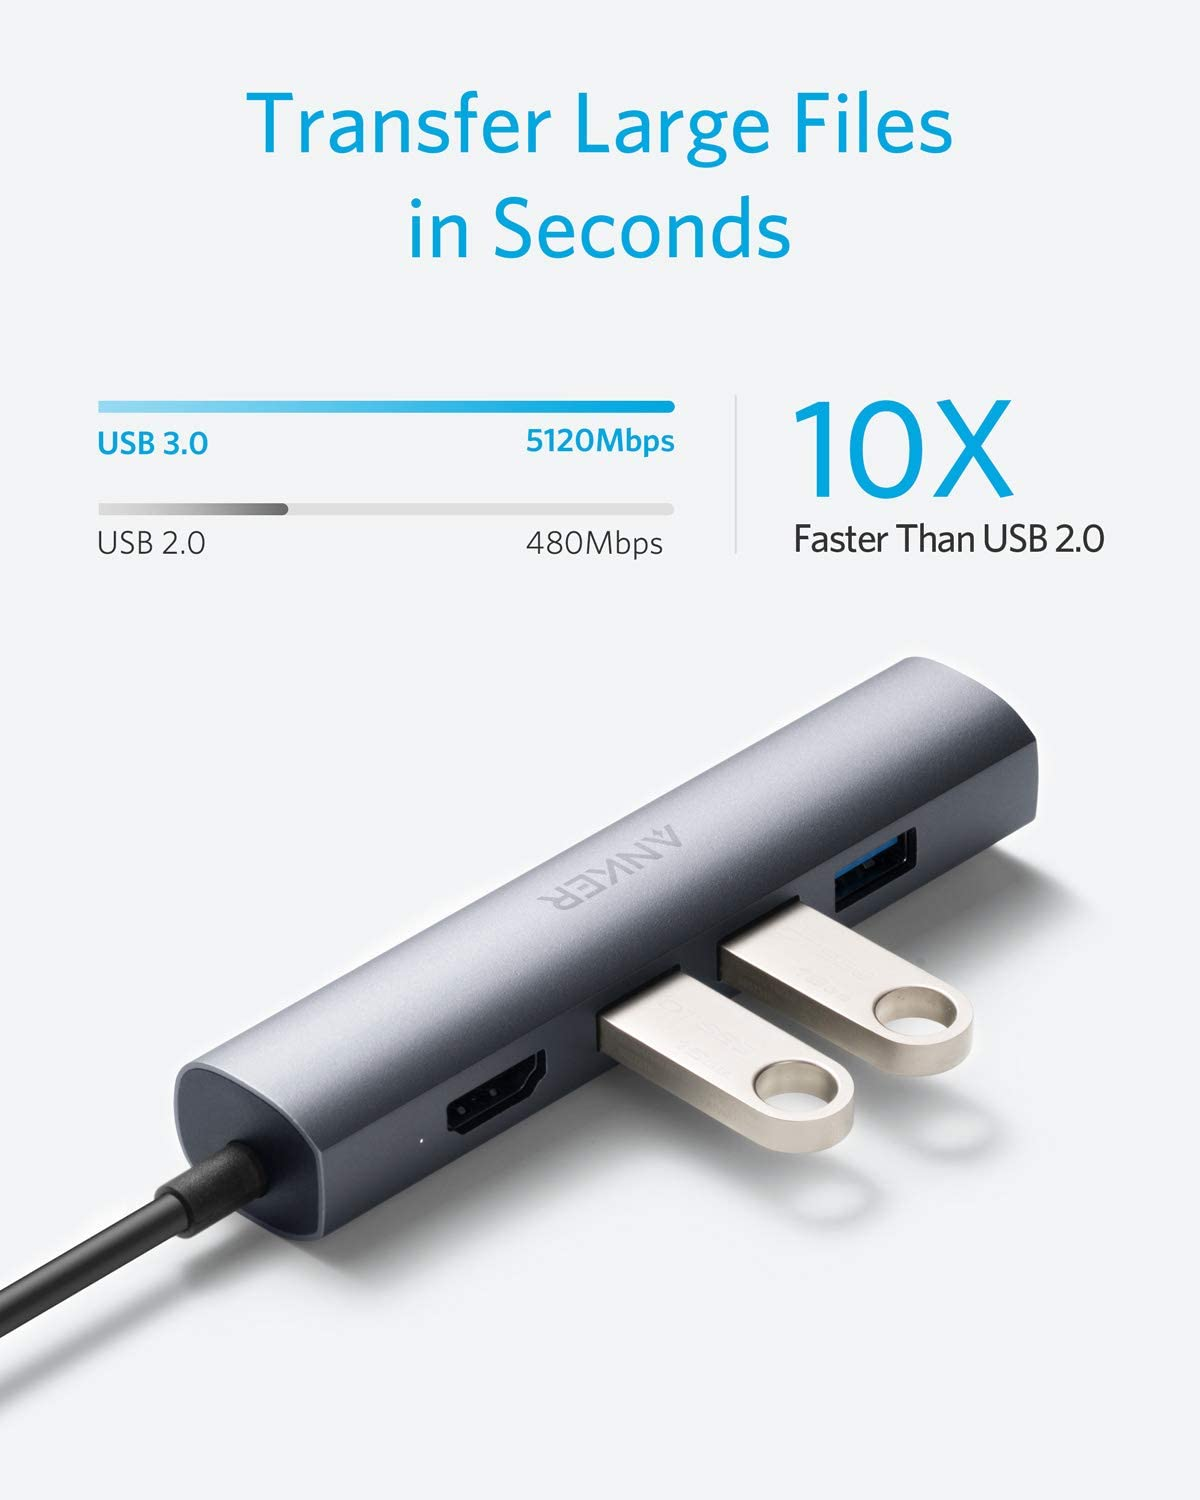 Anker USB C to Gigabit Ethernet Adapter, Aluminum Portable USB C Adapter,  for MacBook Pro, MacBook Air 2018 and Later, iPad Pro 2018 and Later, XPS